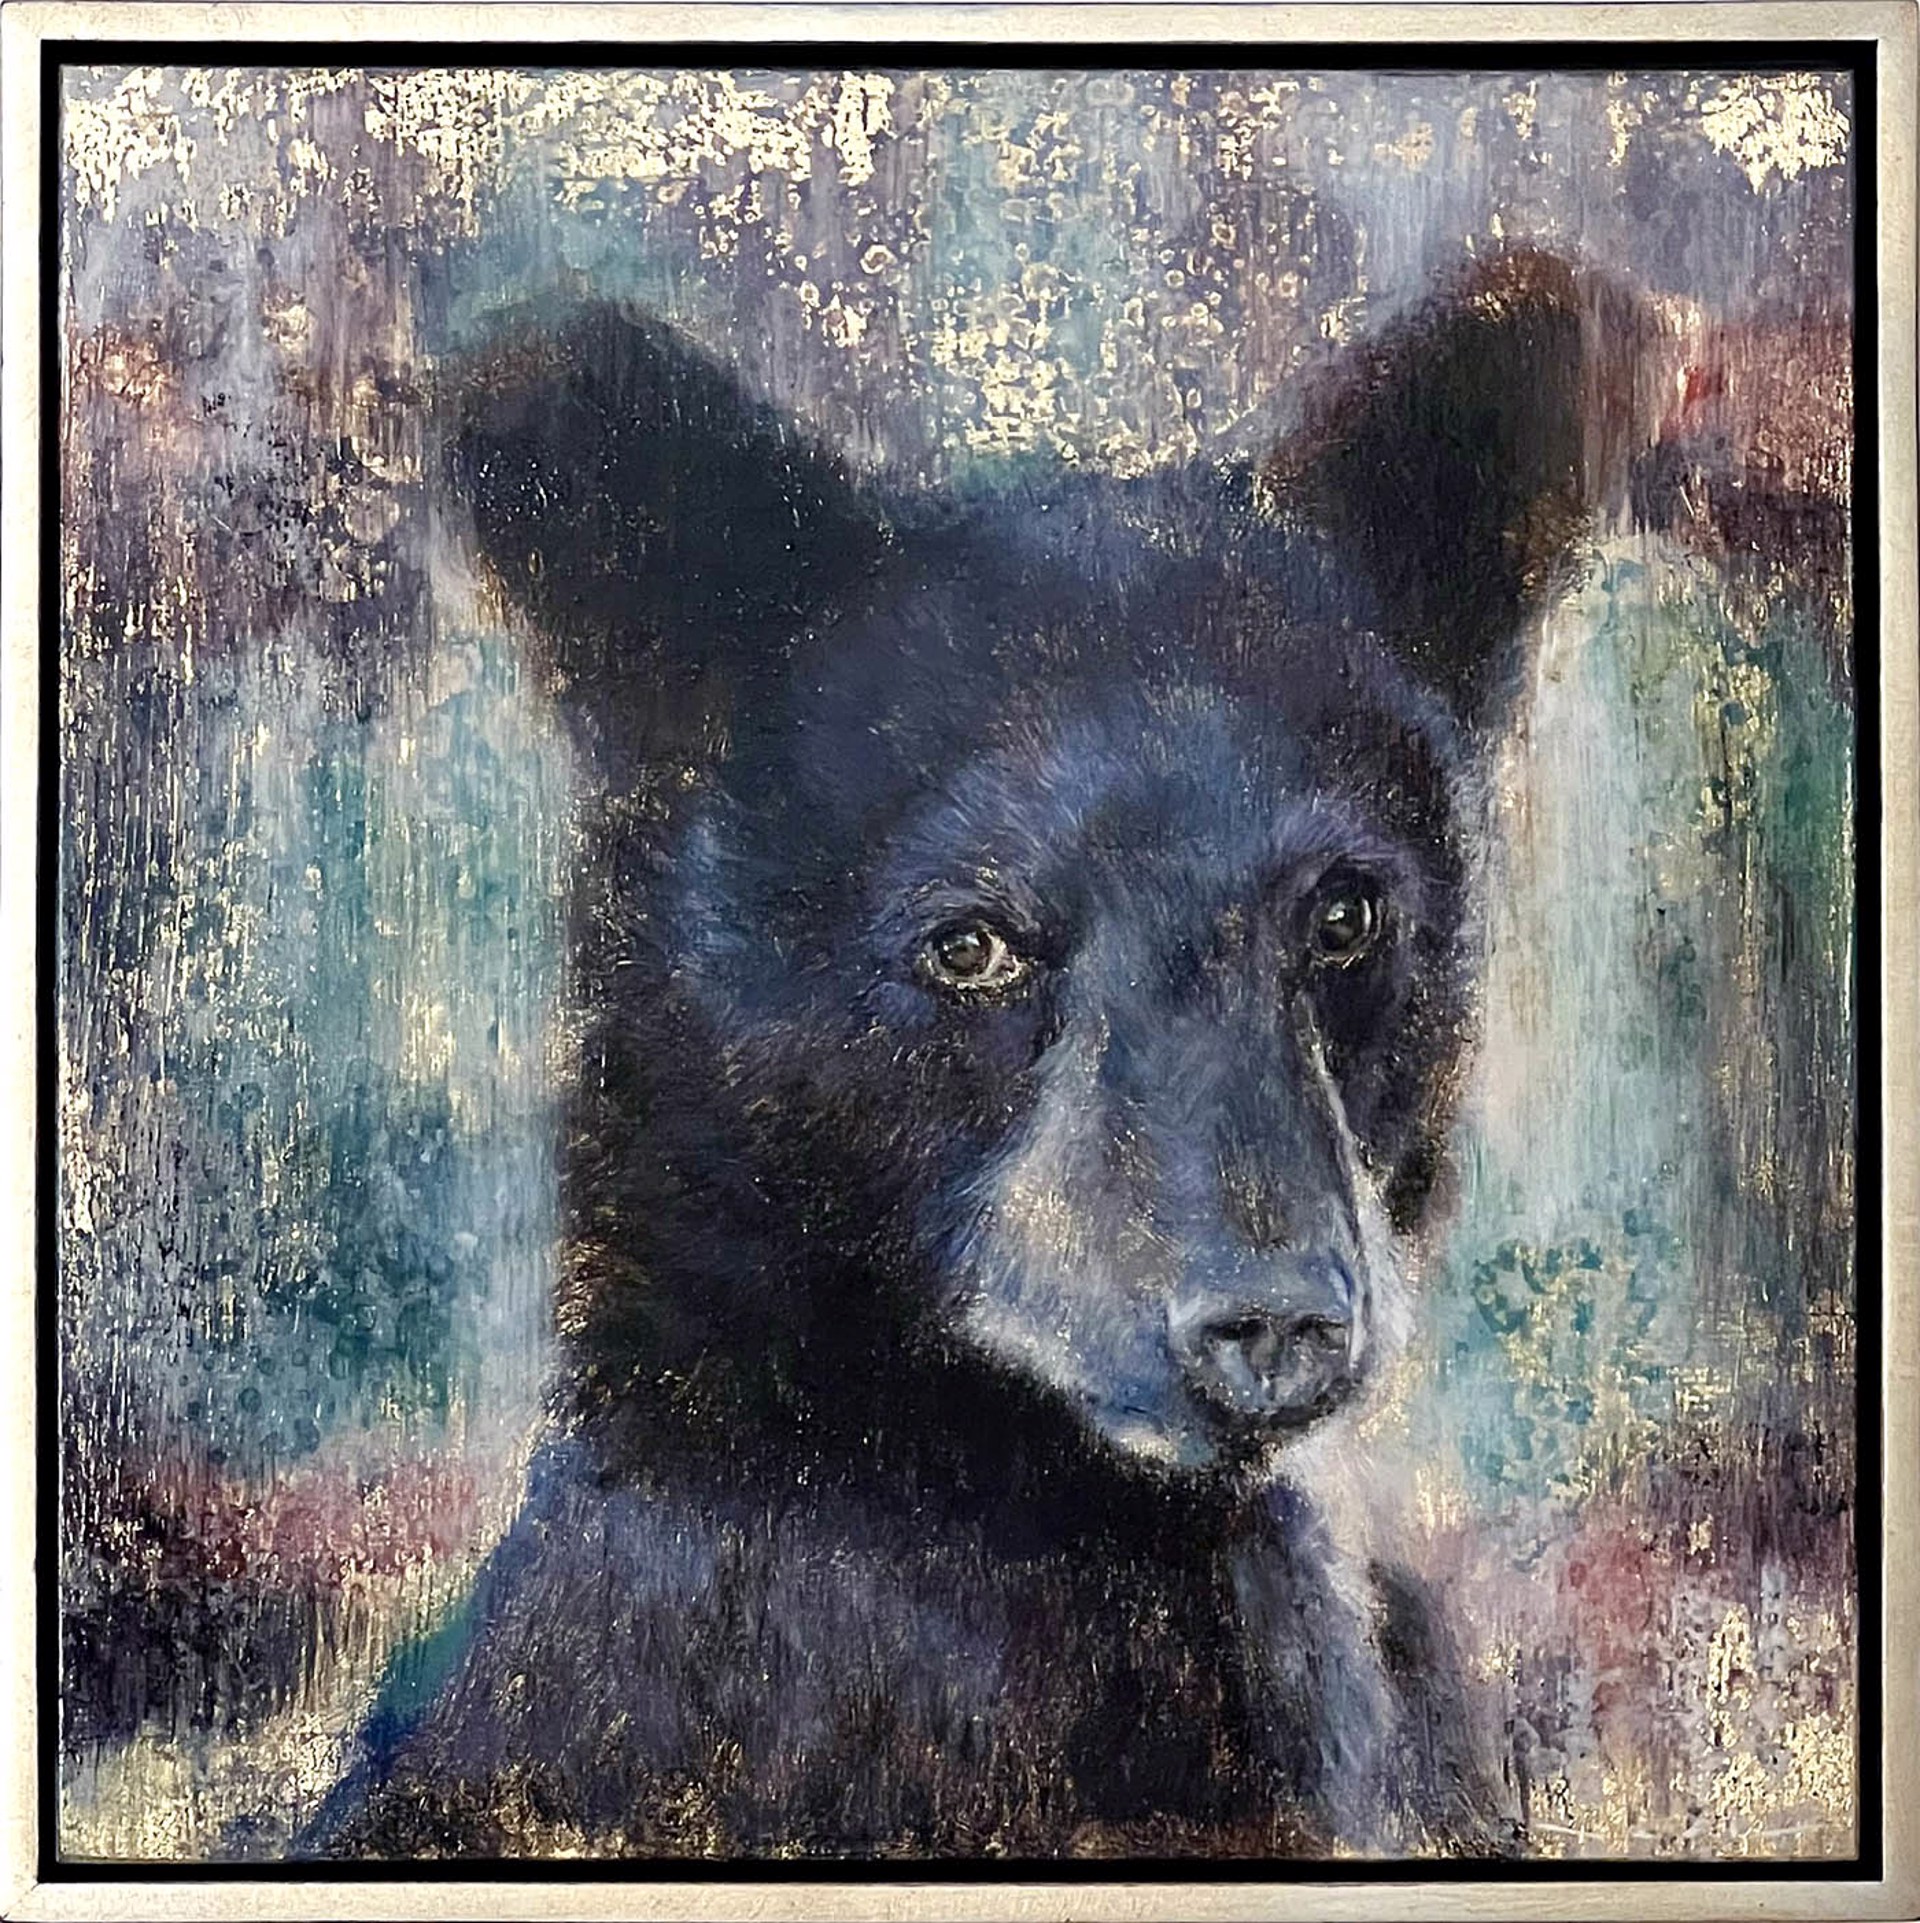 Original Acrylic Painting By Nealy Riley Featuring A Black Bear Cub Over Abstract Background In Teals And Dusty Rose With Gold Leaf Details